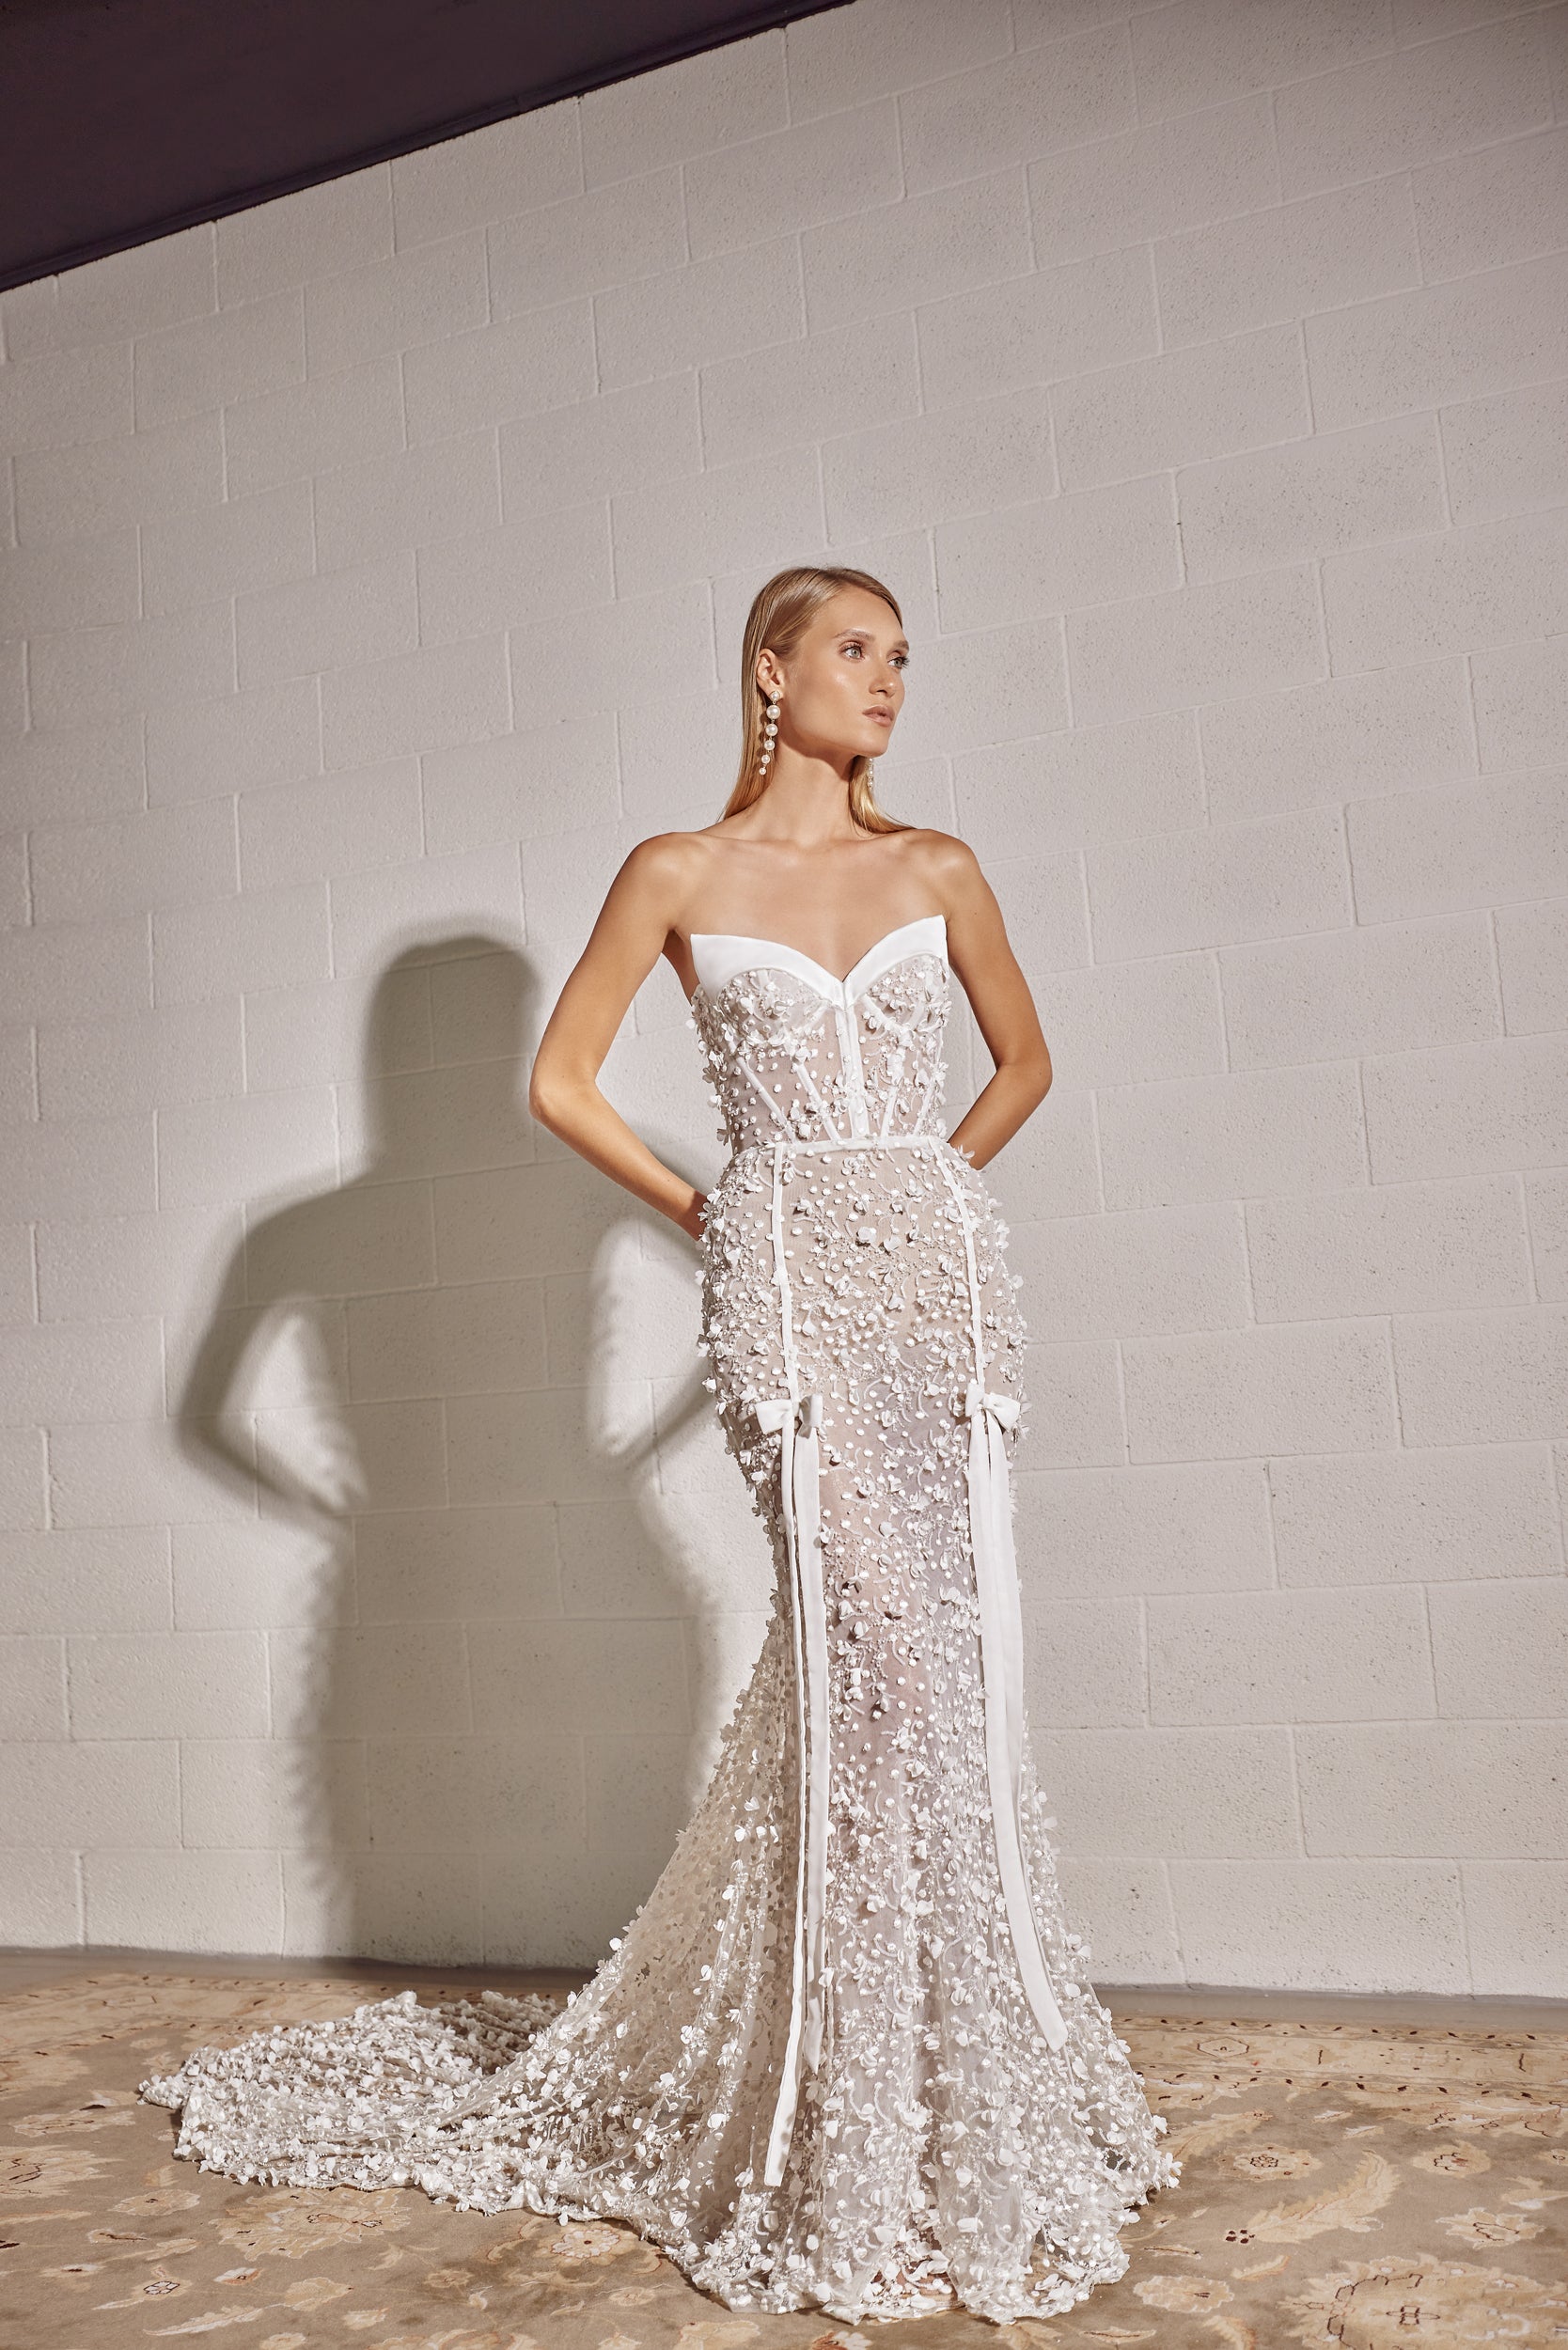 Bow-Adorned Floral Fit-and-Flare Gown With Detachable Overskirt by Tal Kedem Bridal Couture - Image 1